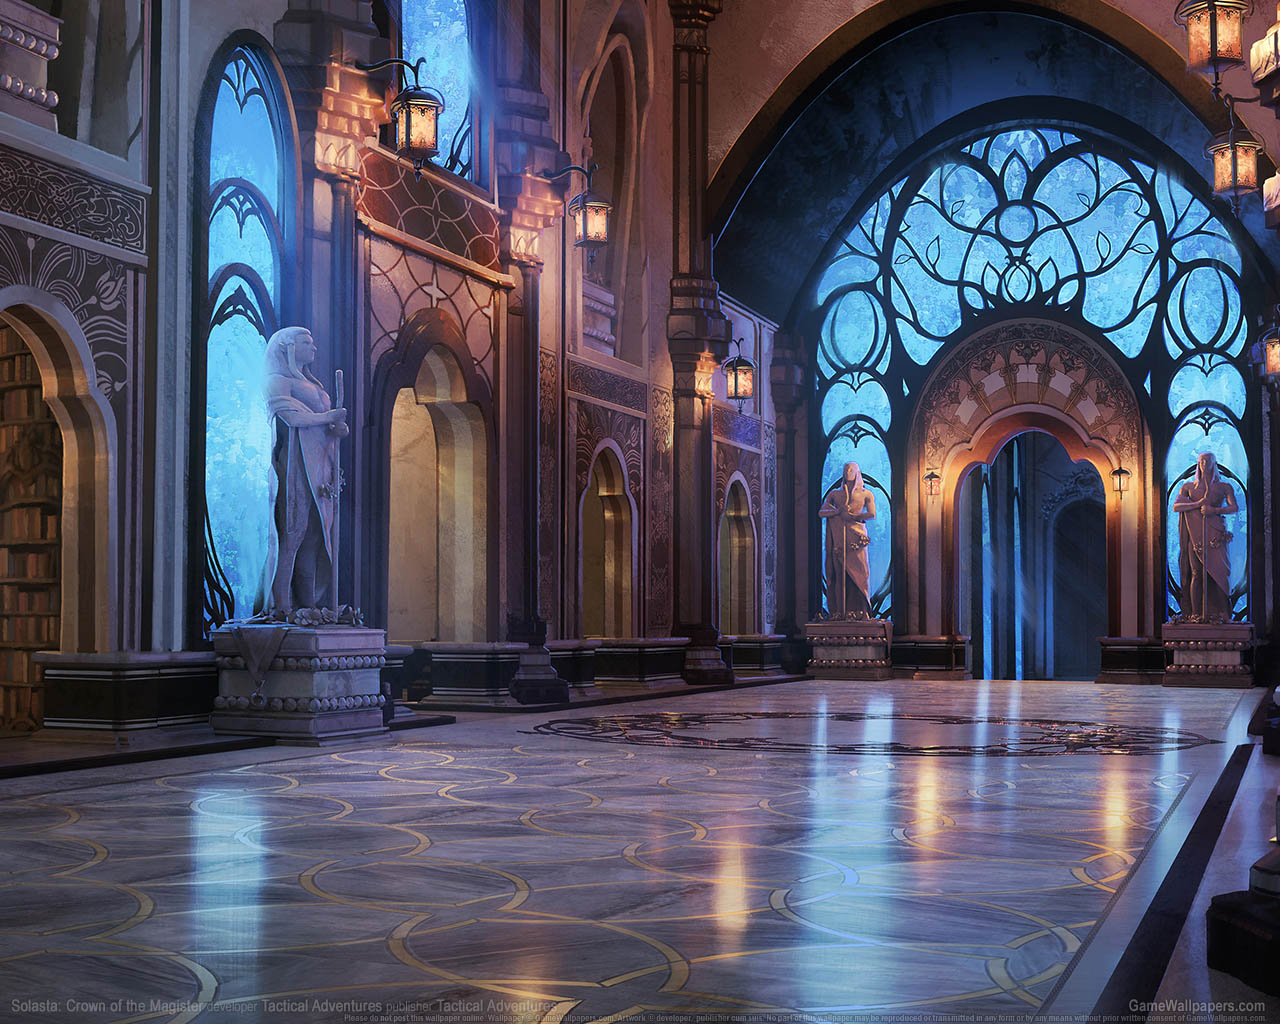 Solasta%253A Crown of the Magister wallpaper 01 1280x1024